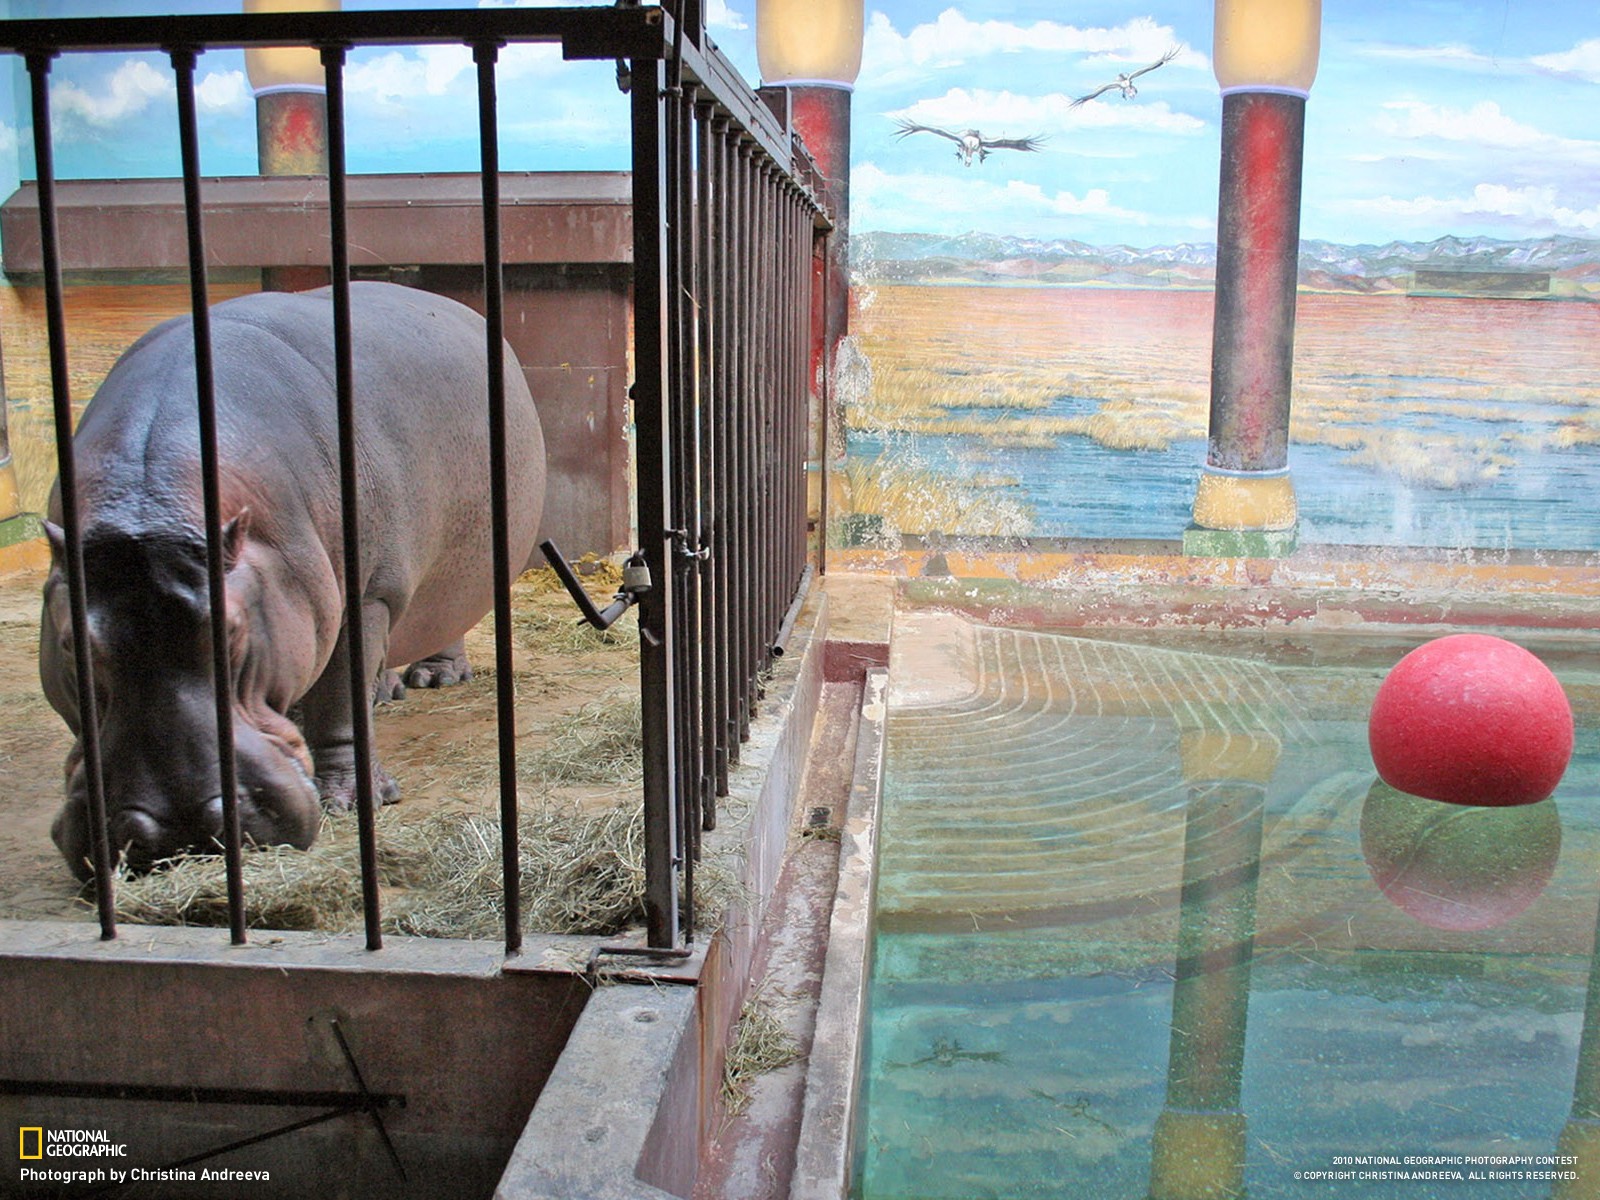 General 1600x1200 hippos cages animals National Geographic 2010 (Year)